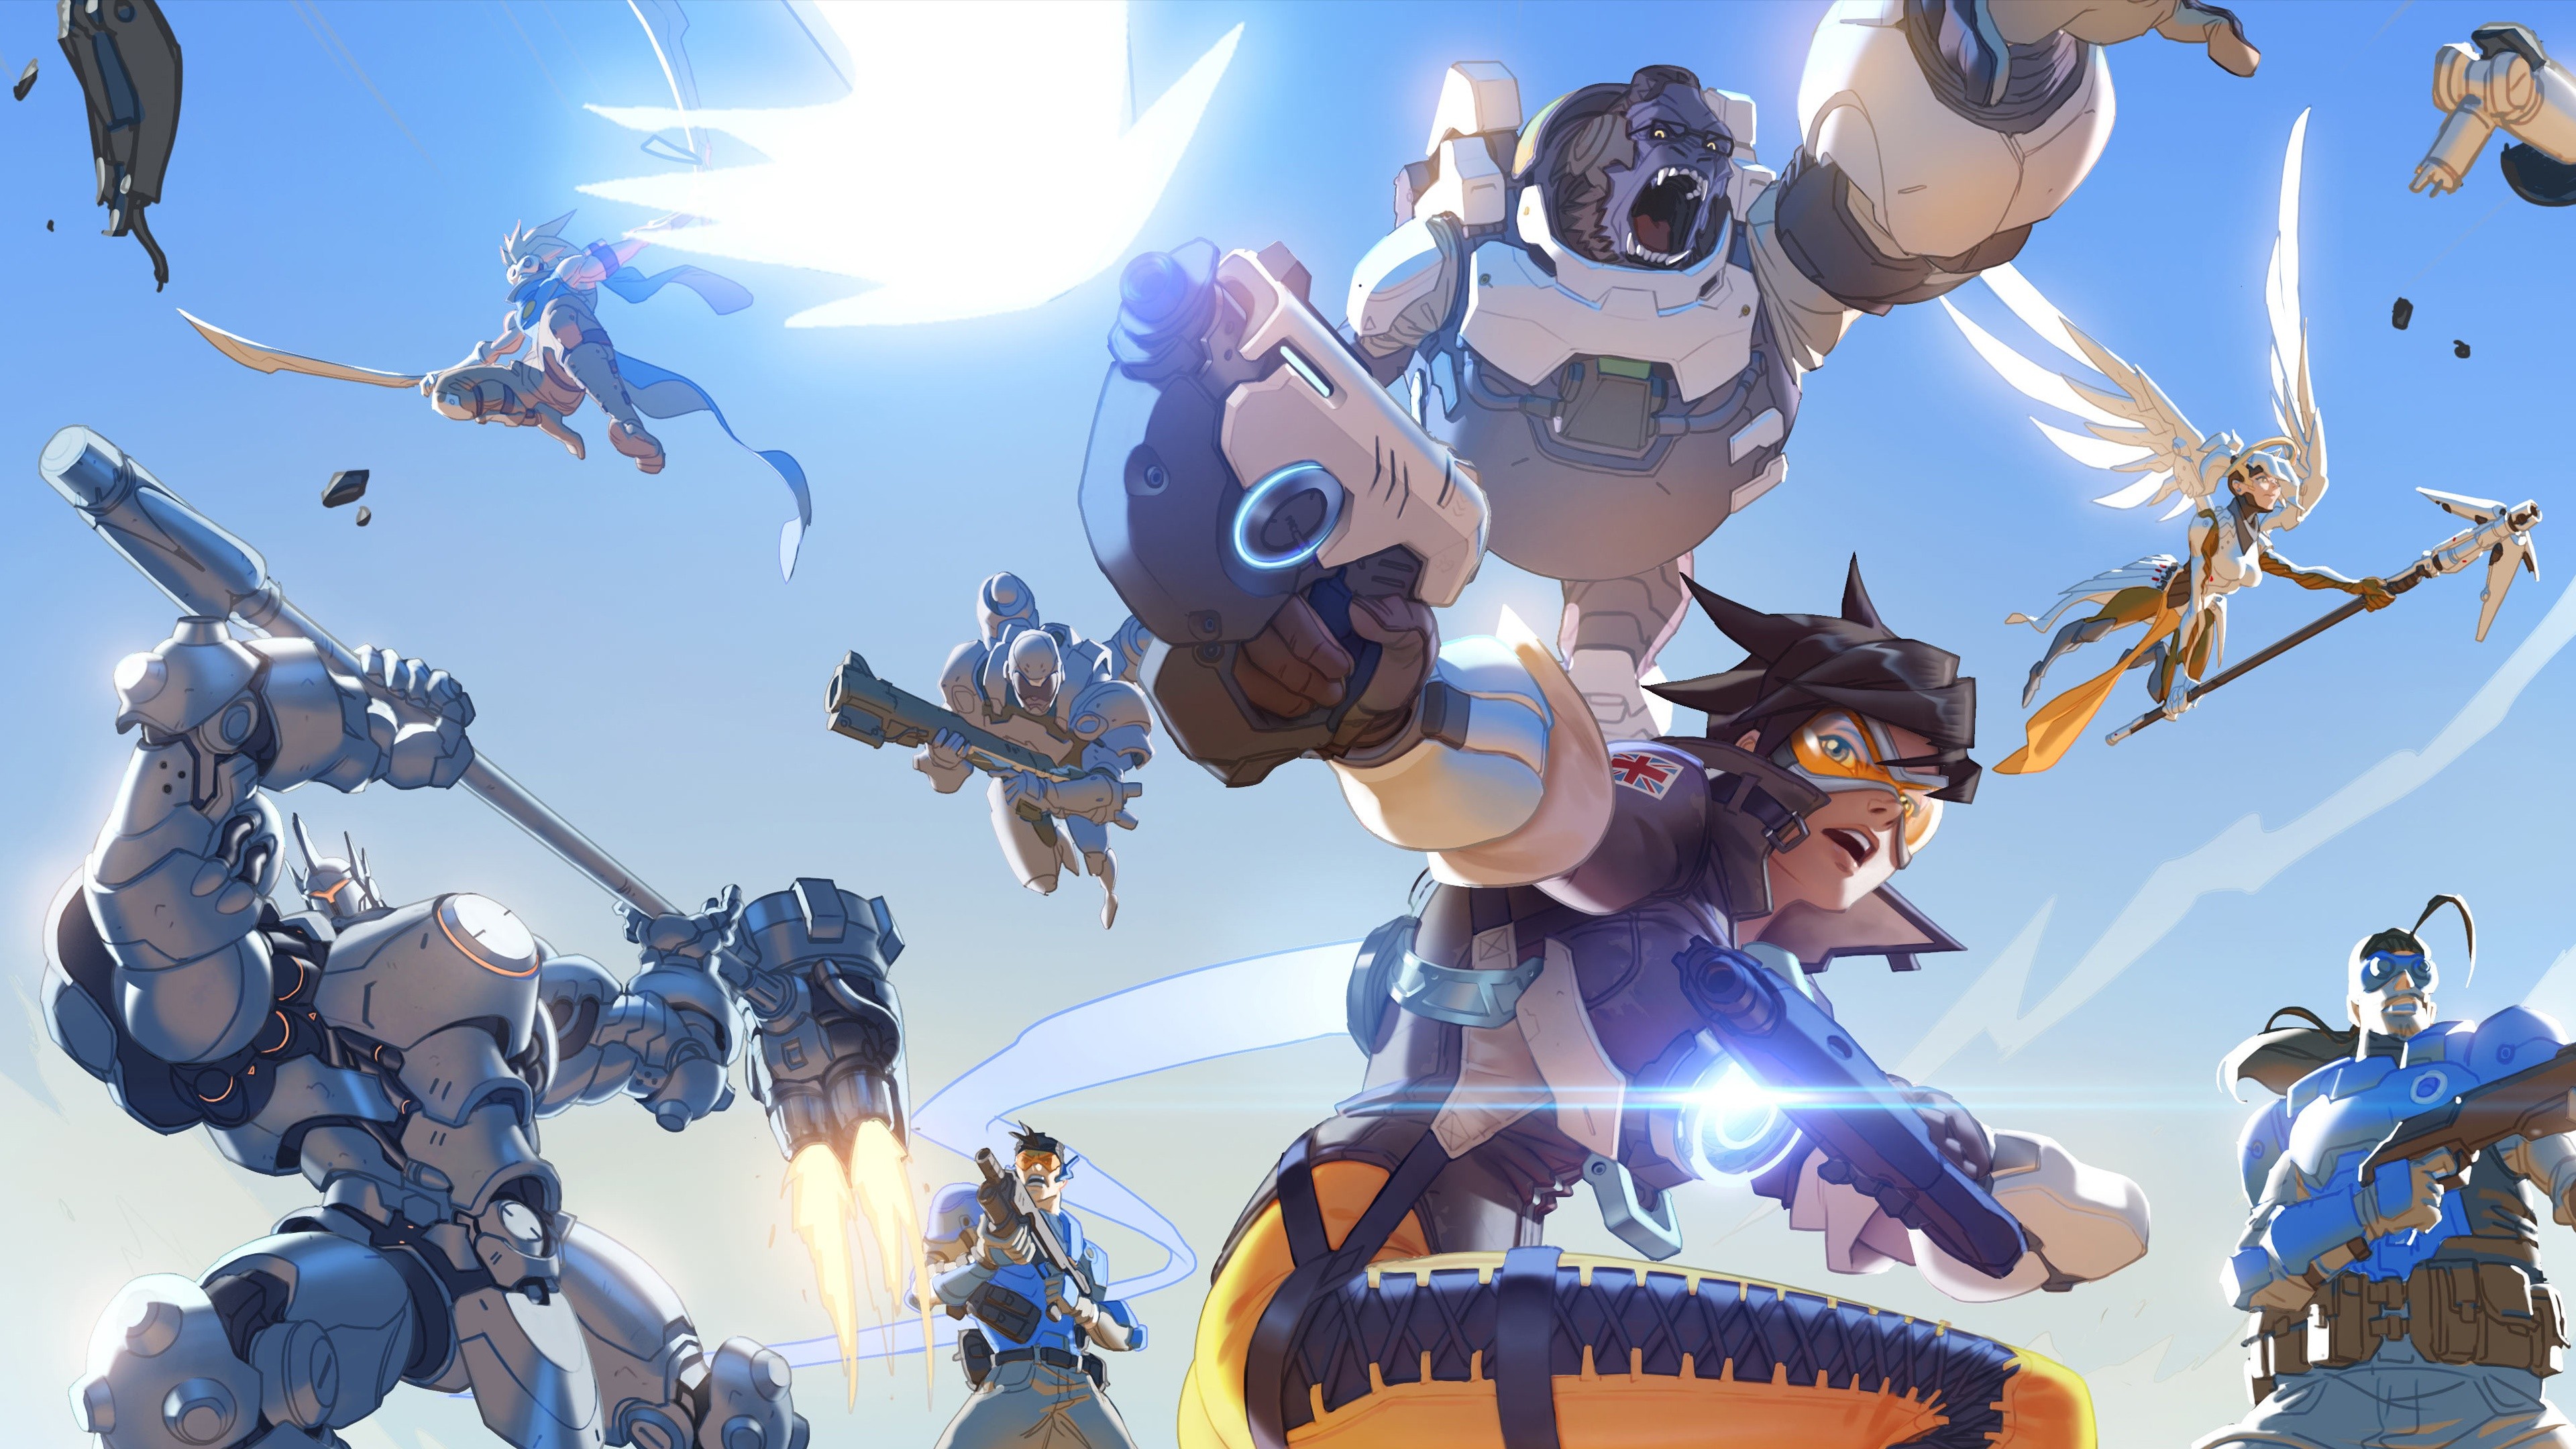 Overwatch wallpaper 1080p ·① Download free cool High Resolution